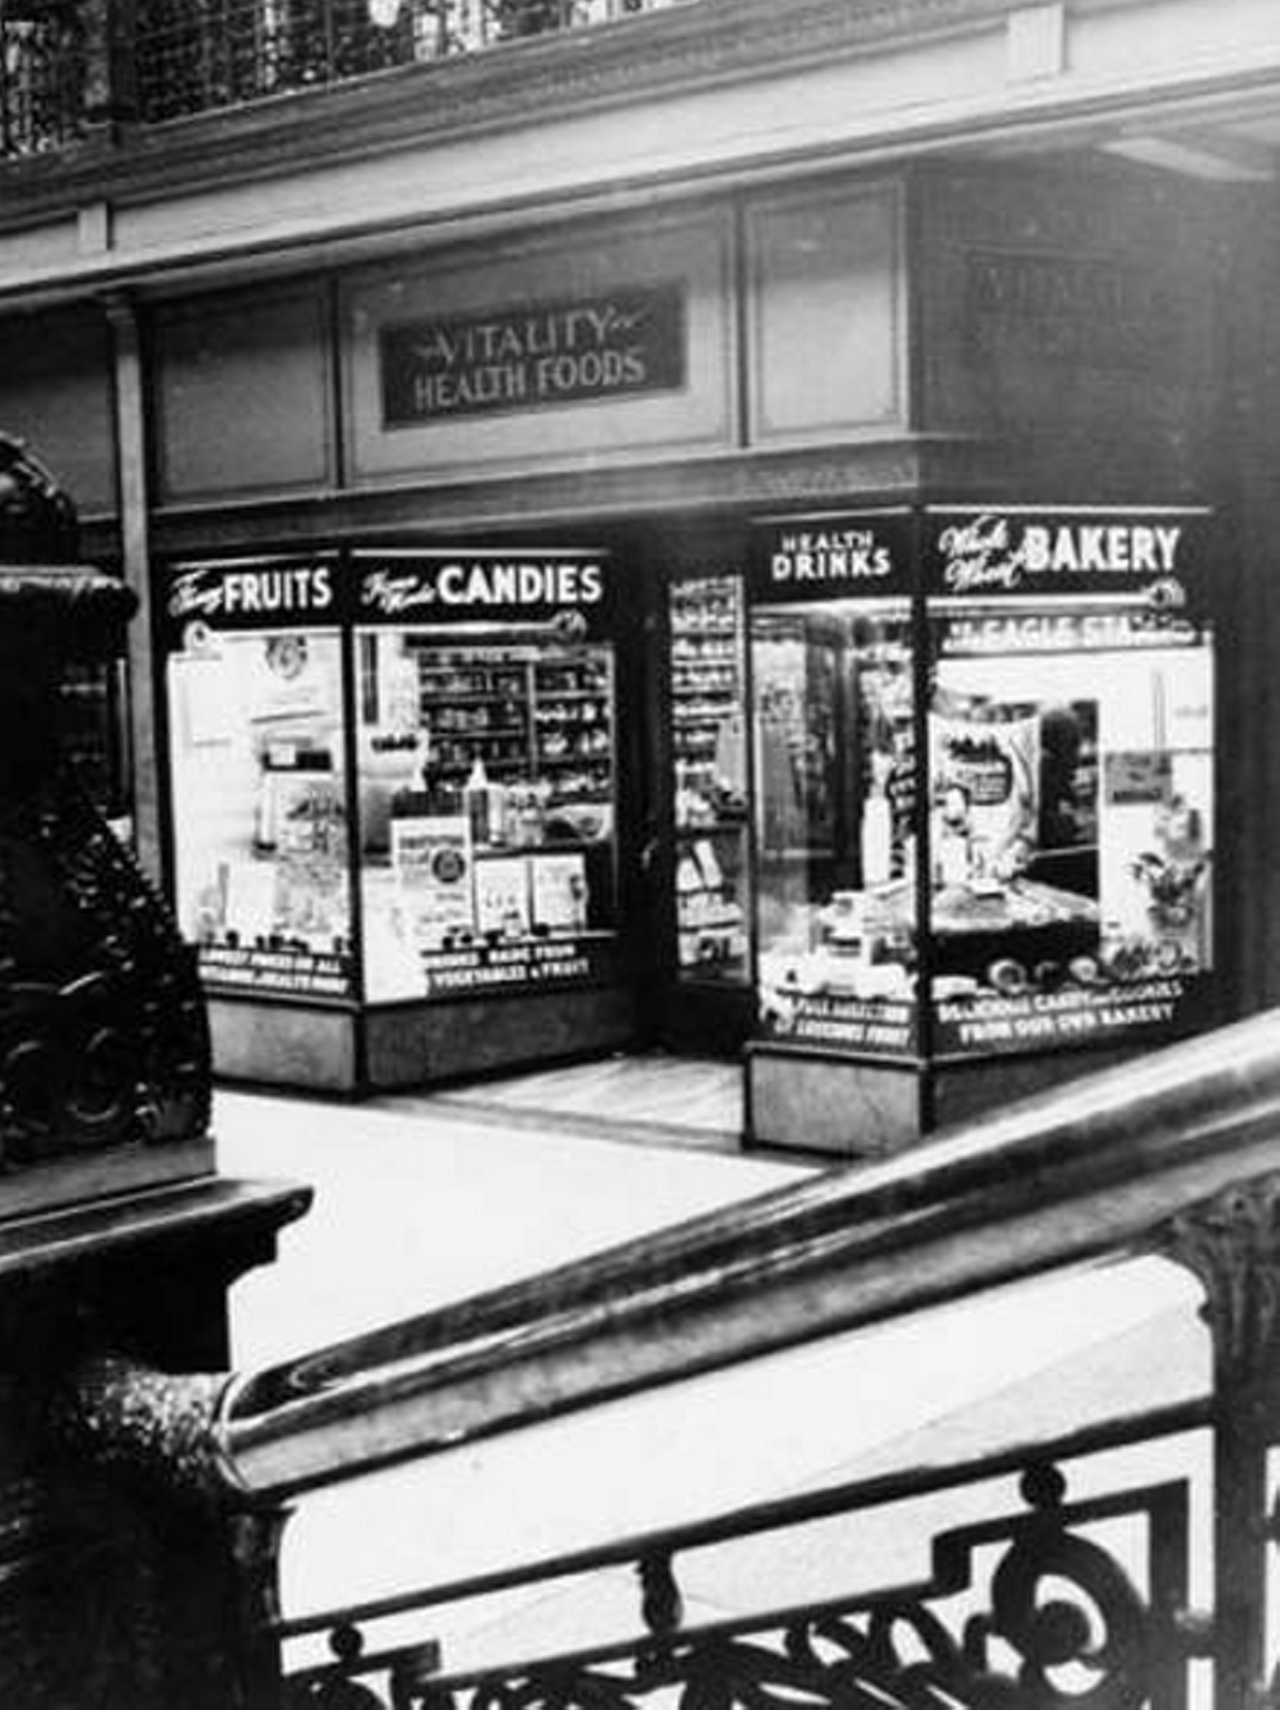 Vitality Health Foods store in the Arcade, 1971.